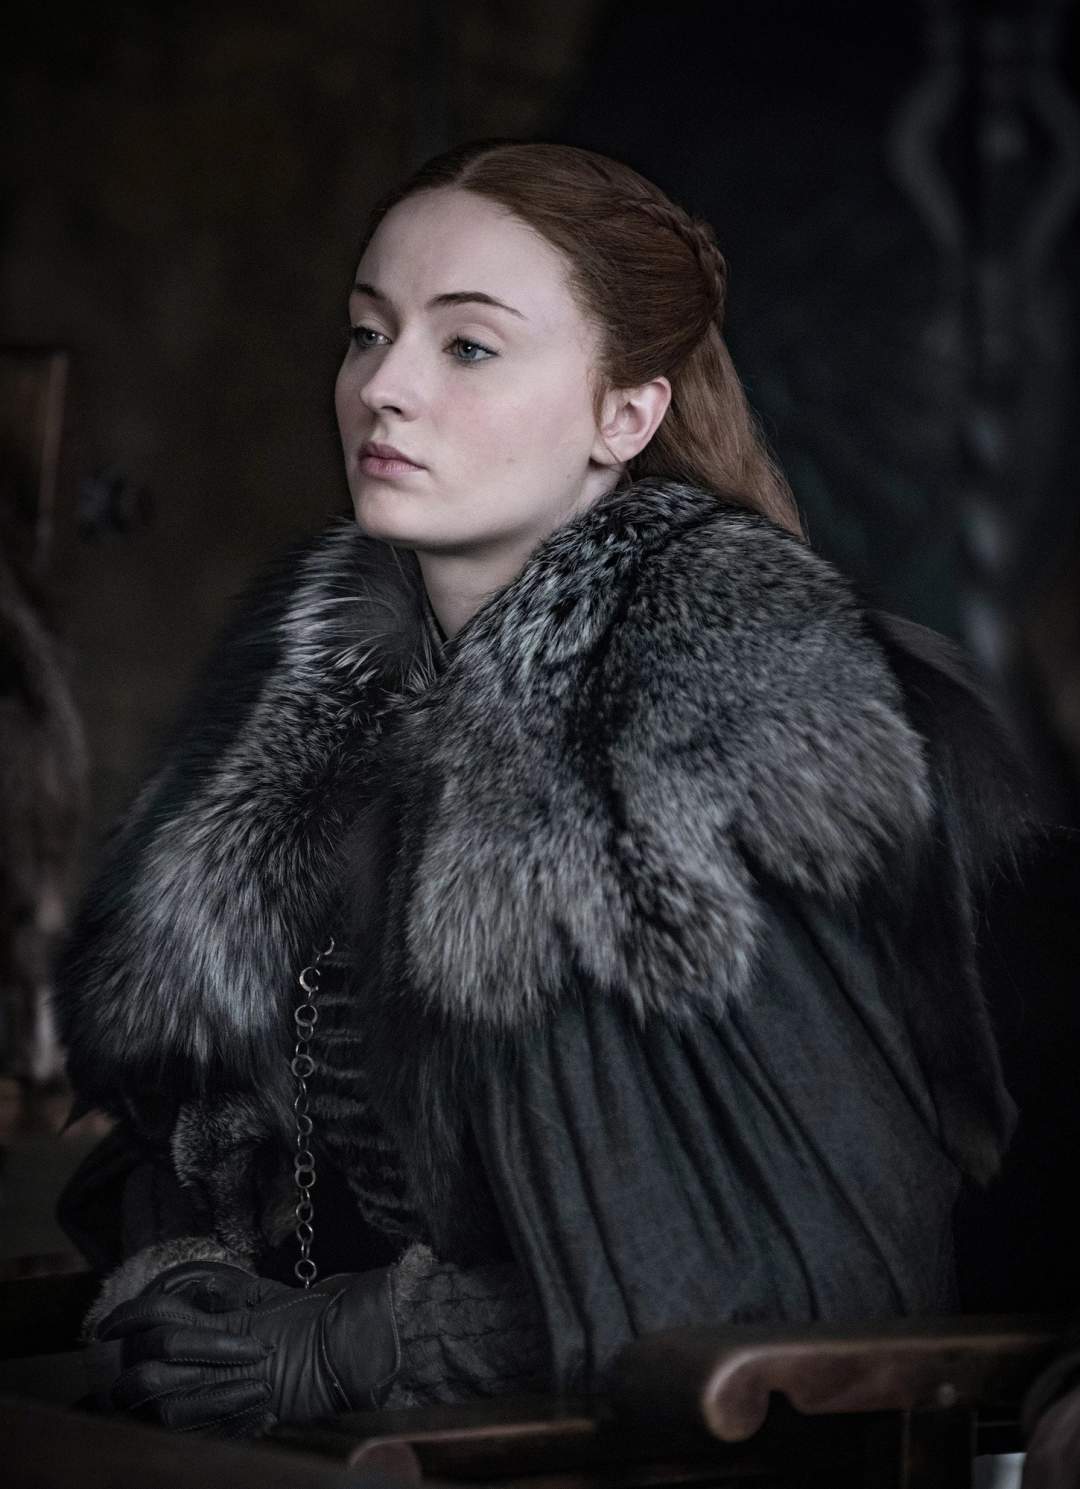 Sophie Turner says criticism of her role as Sansa Stark on the hit series led to her depression